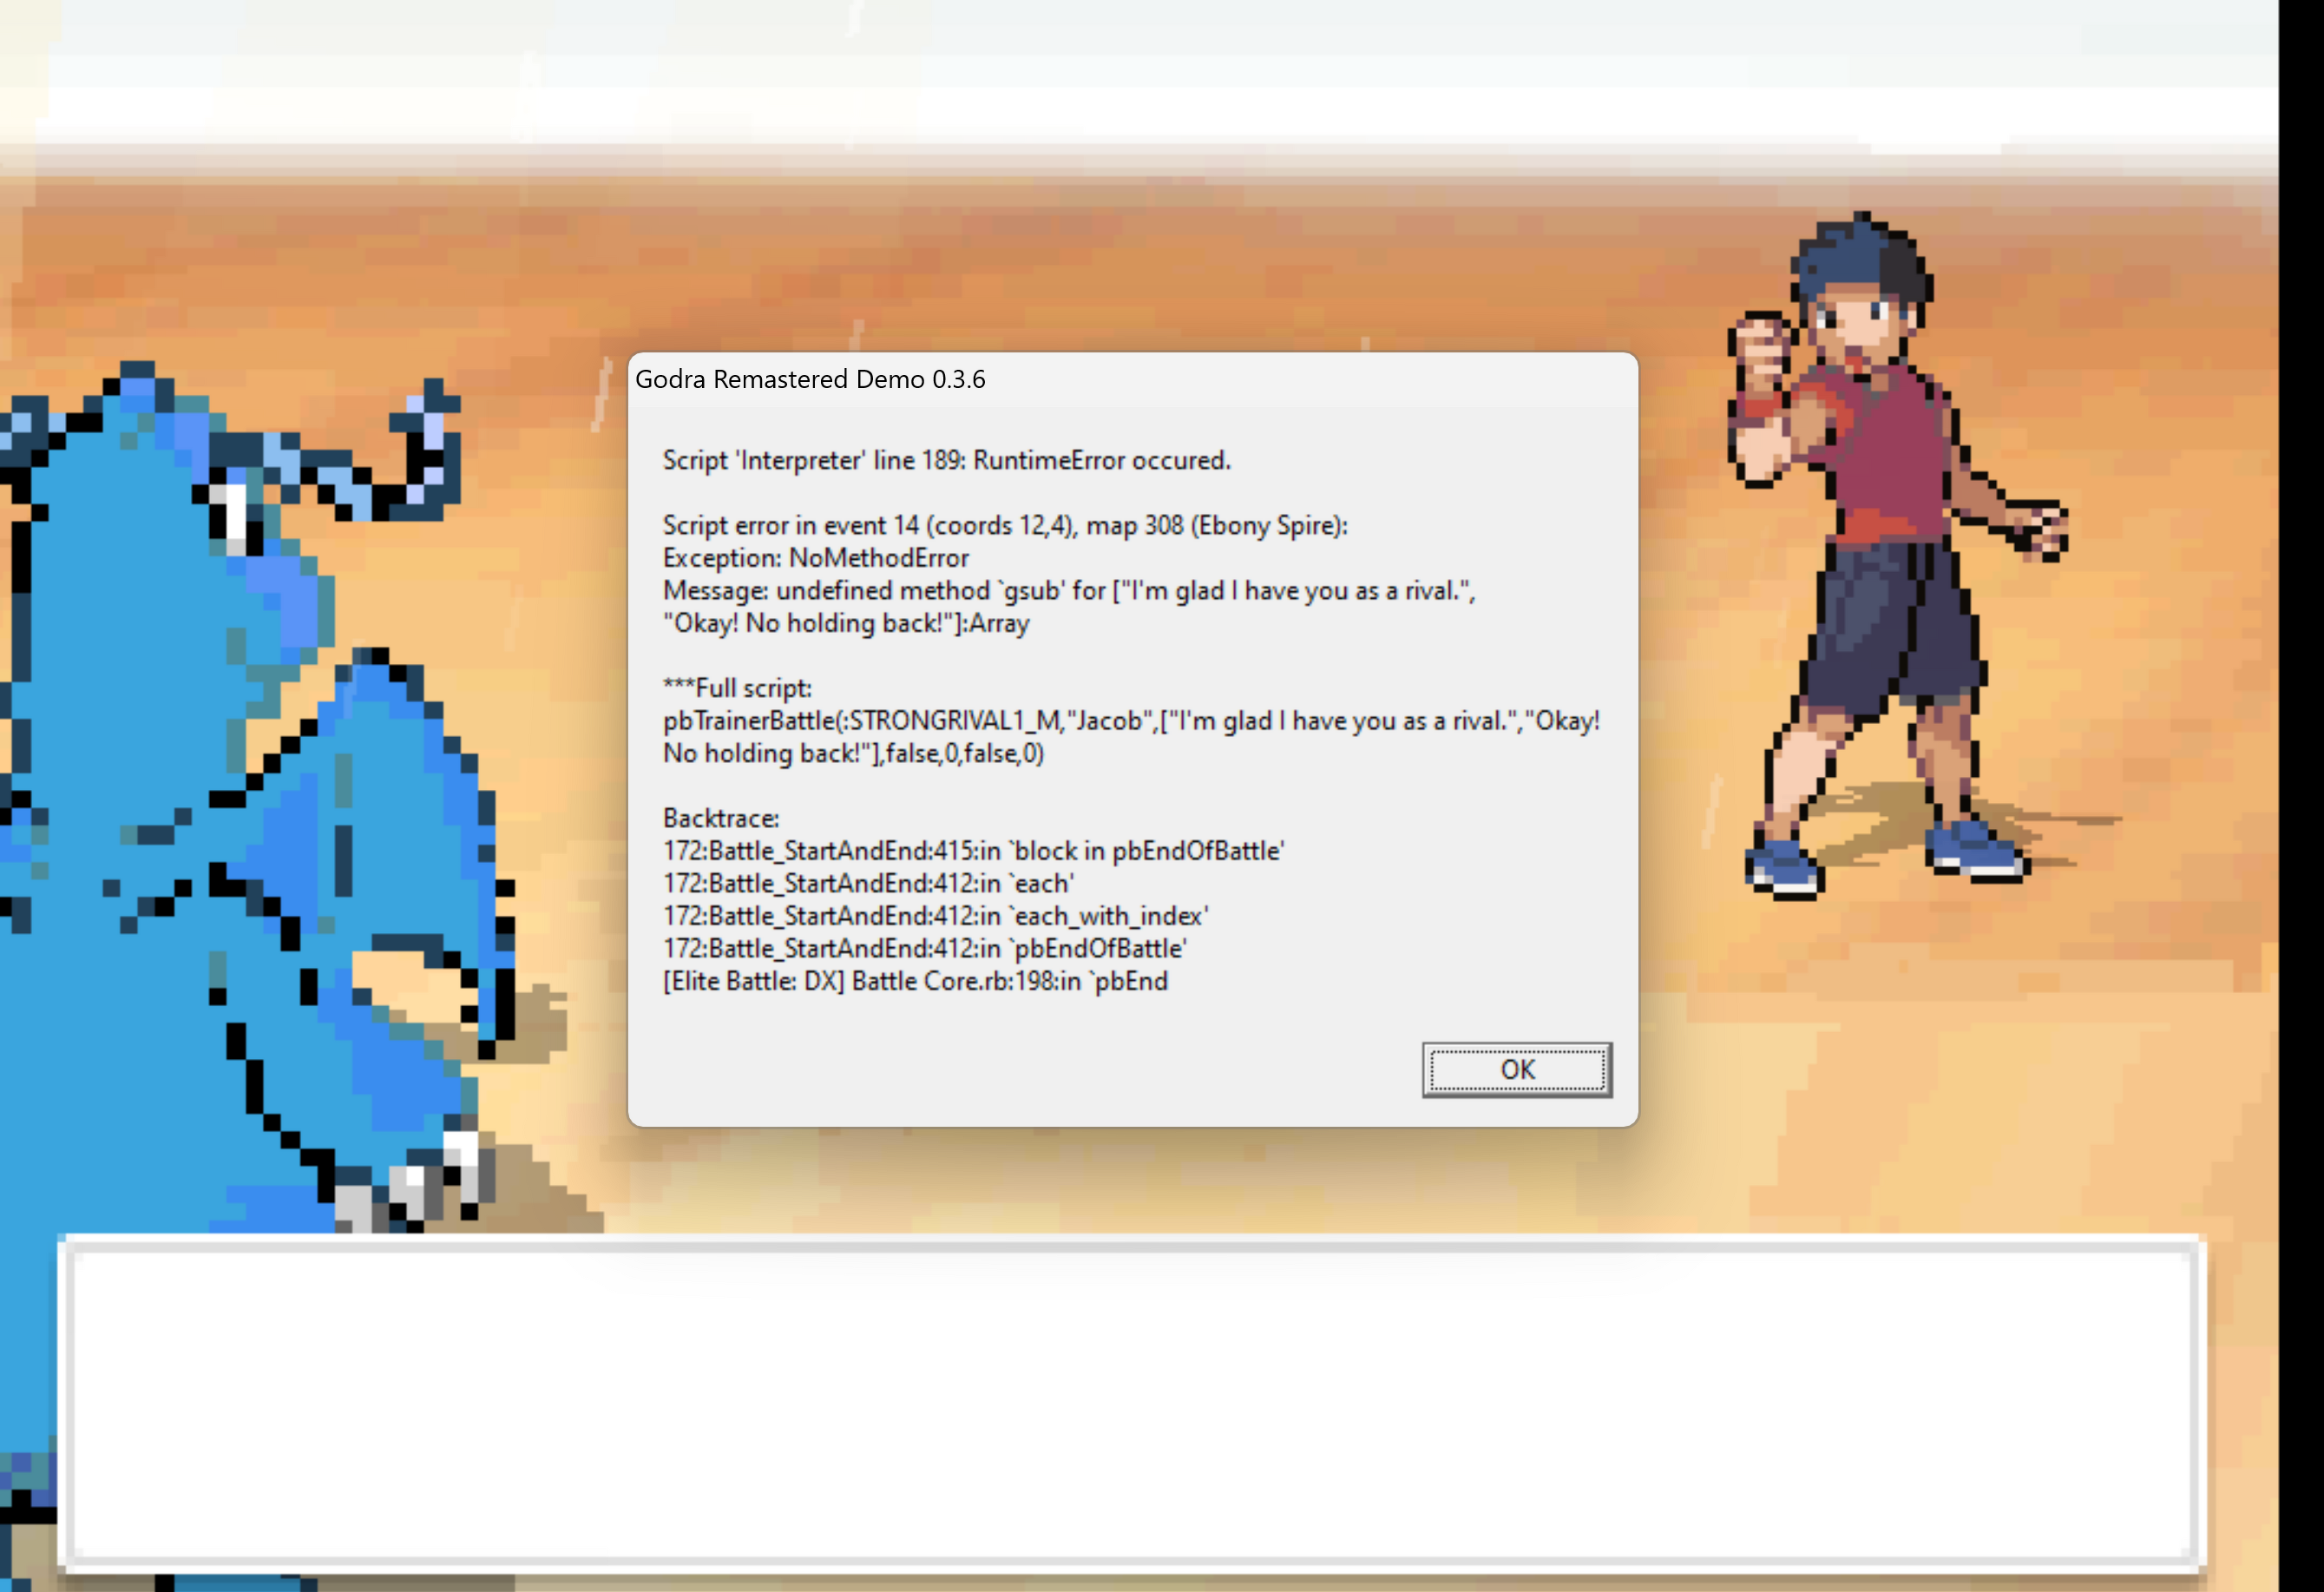 Found PokeMMO a week ago and can't stop. Just got to the Elite 4